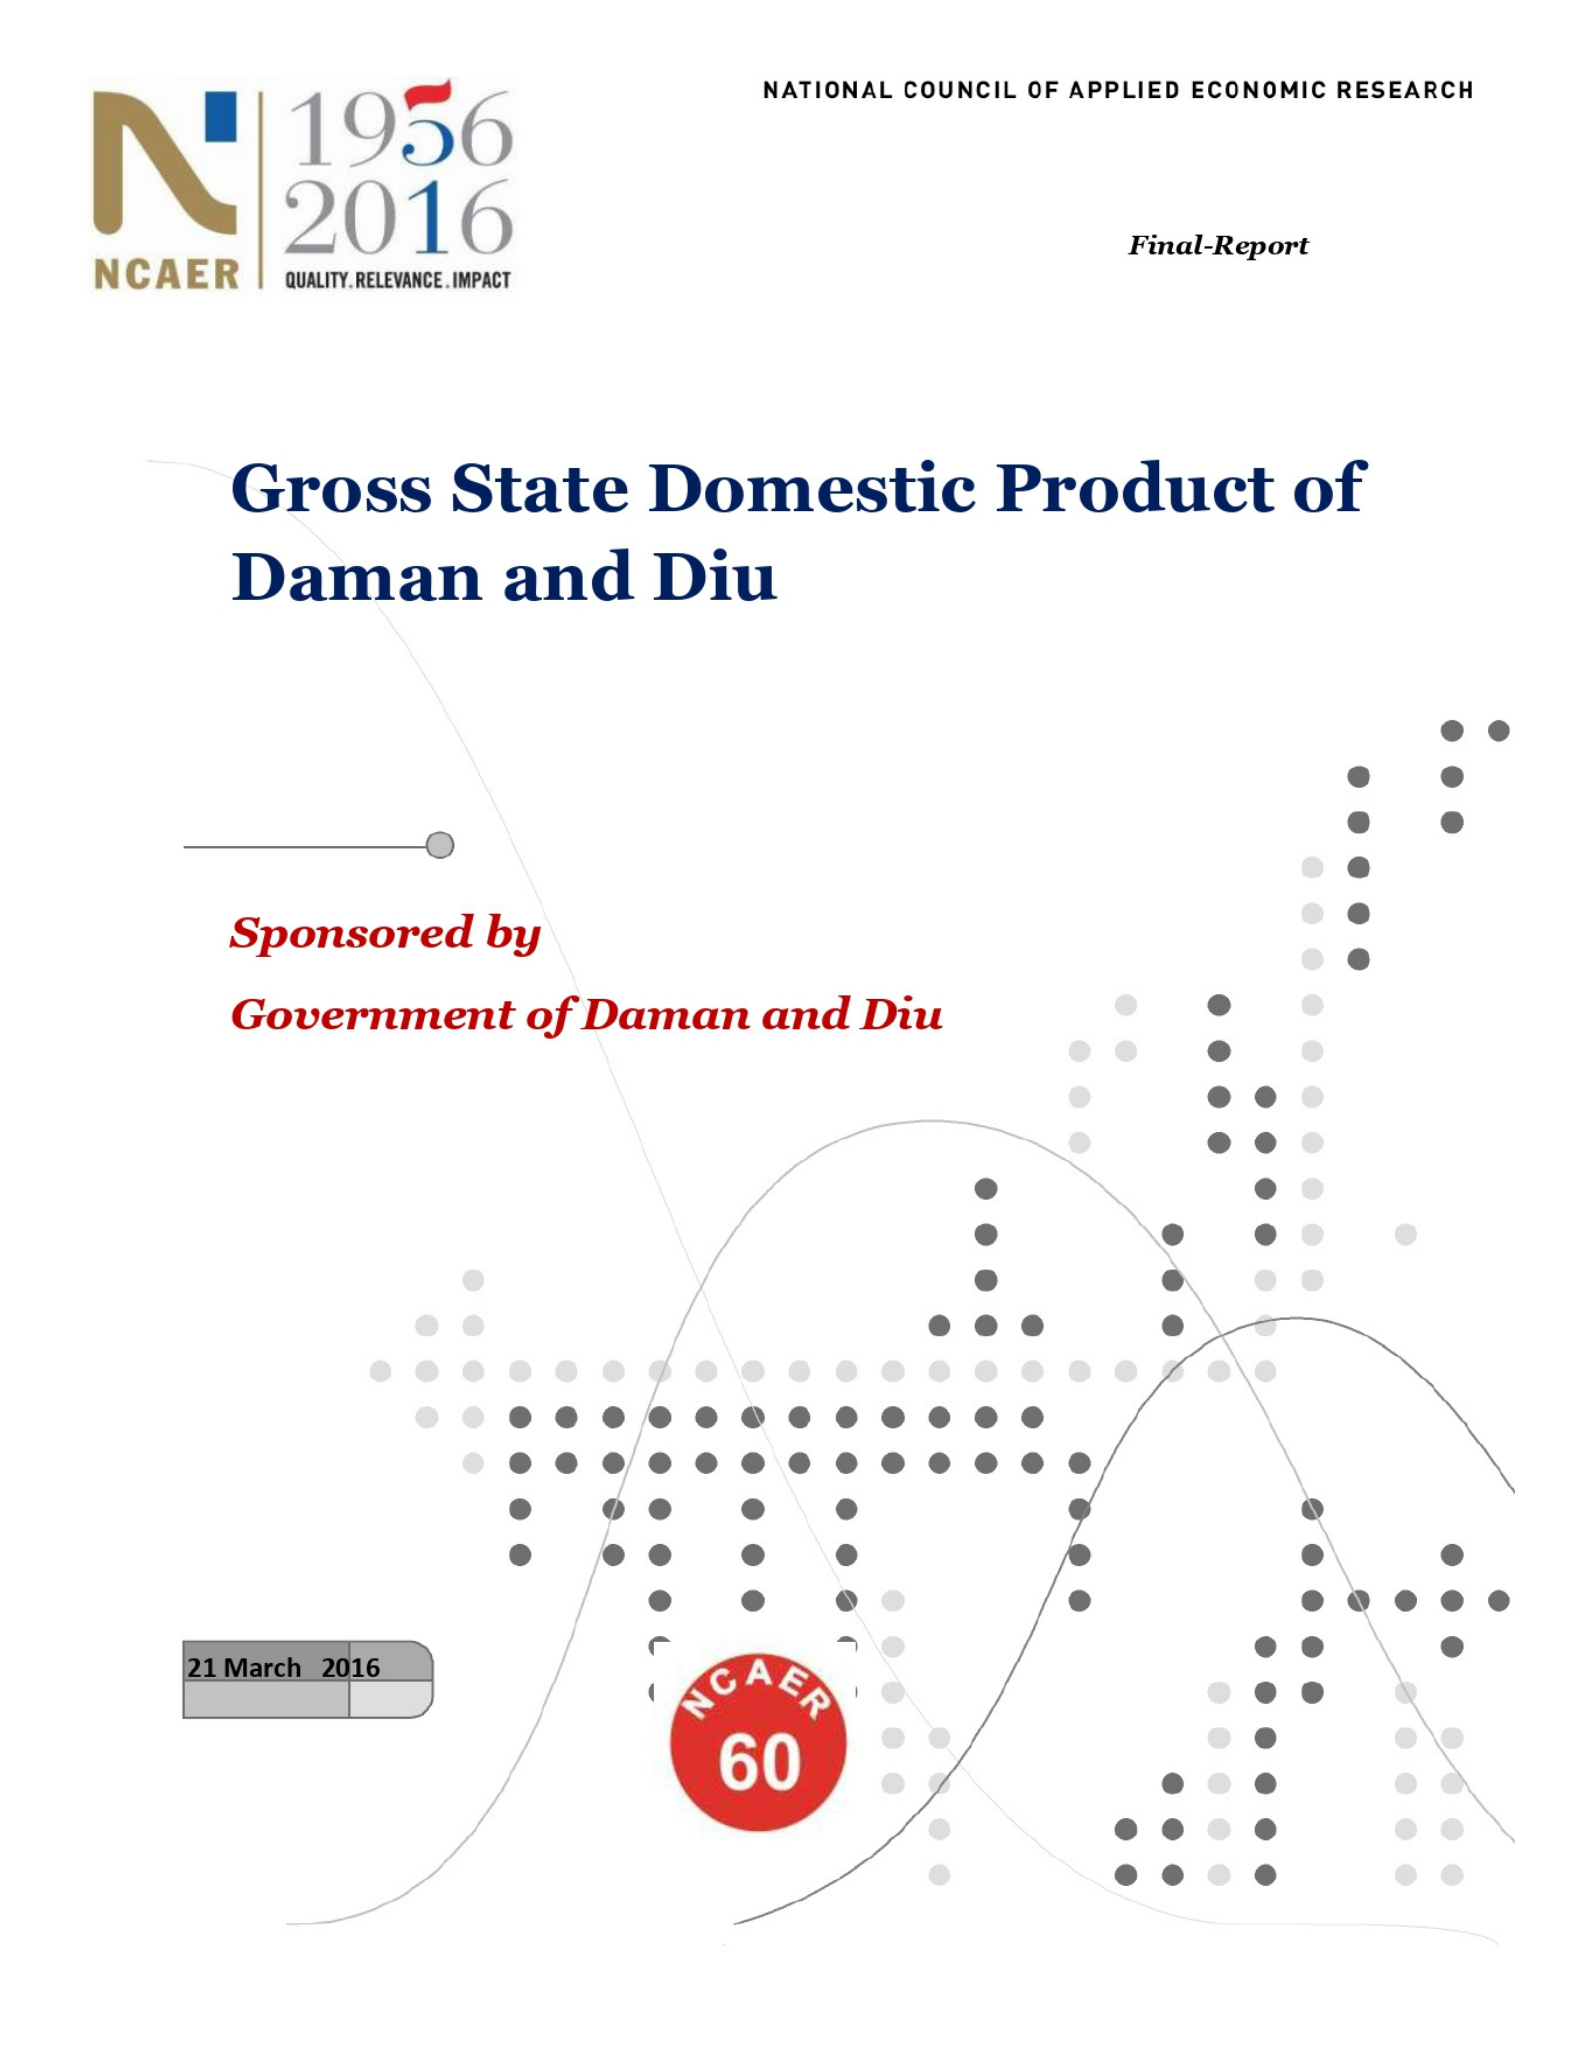 14688Gross State Domestic Product of Daman and Diu